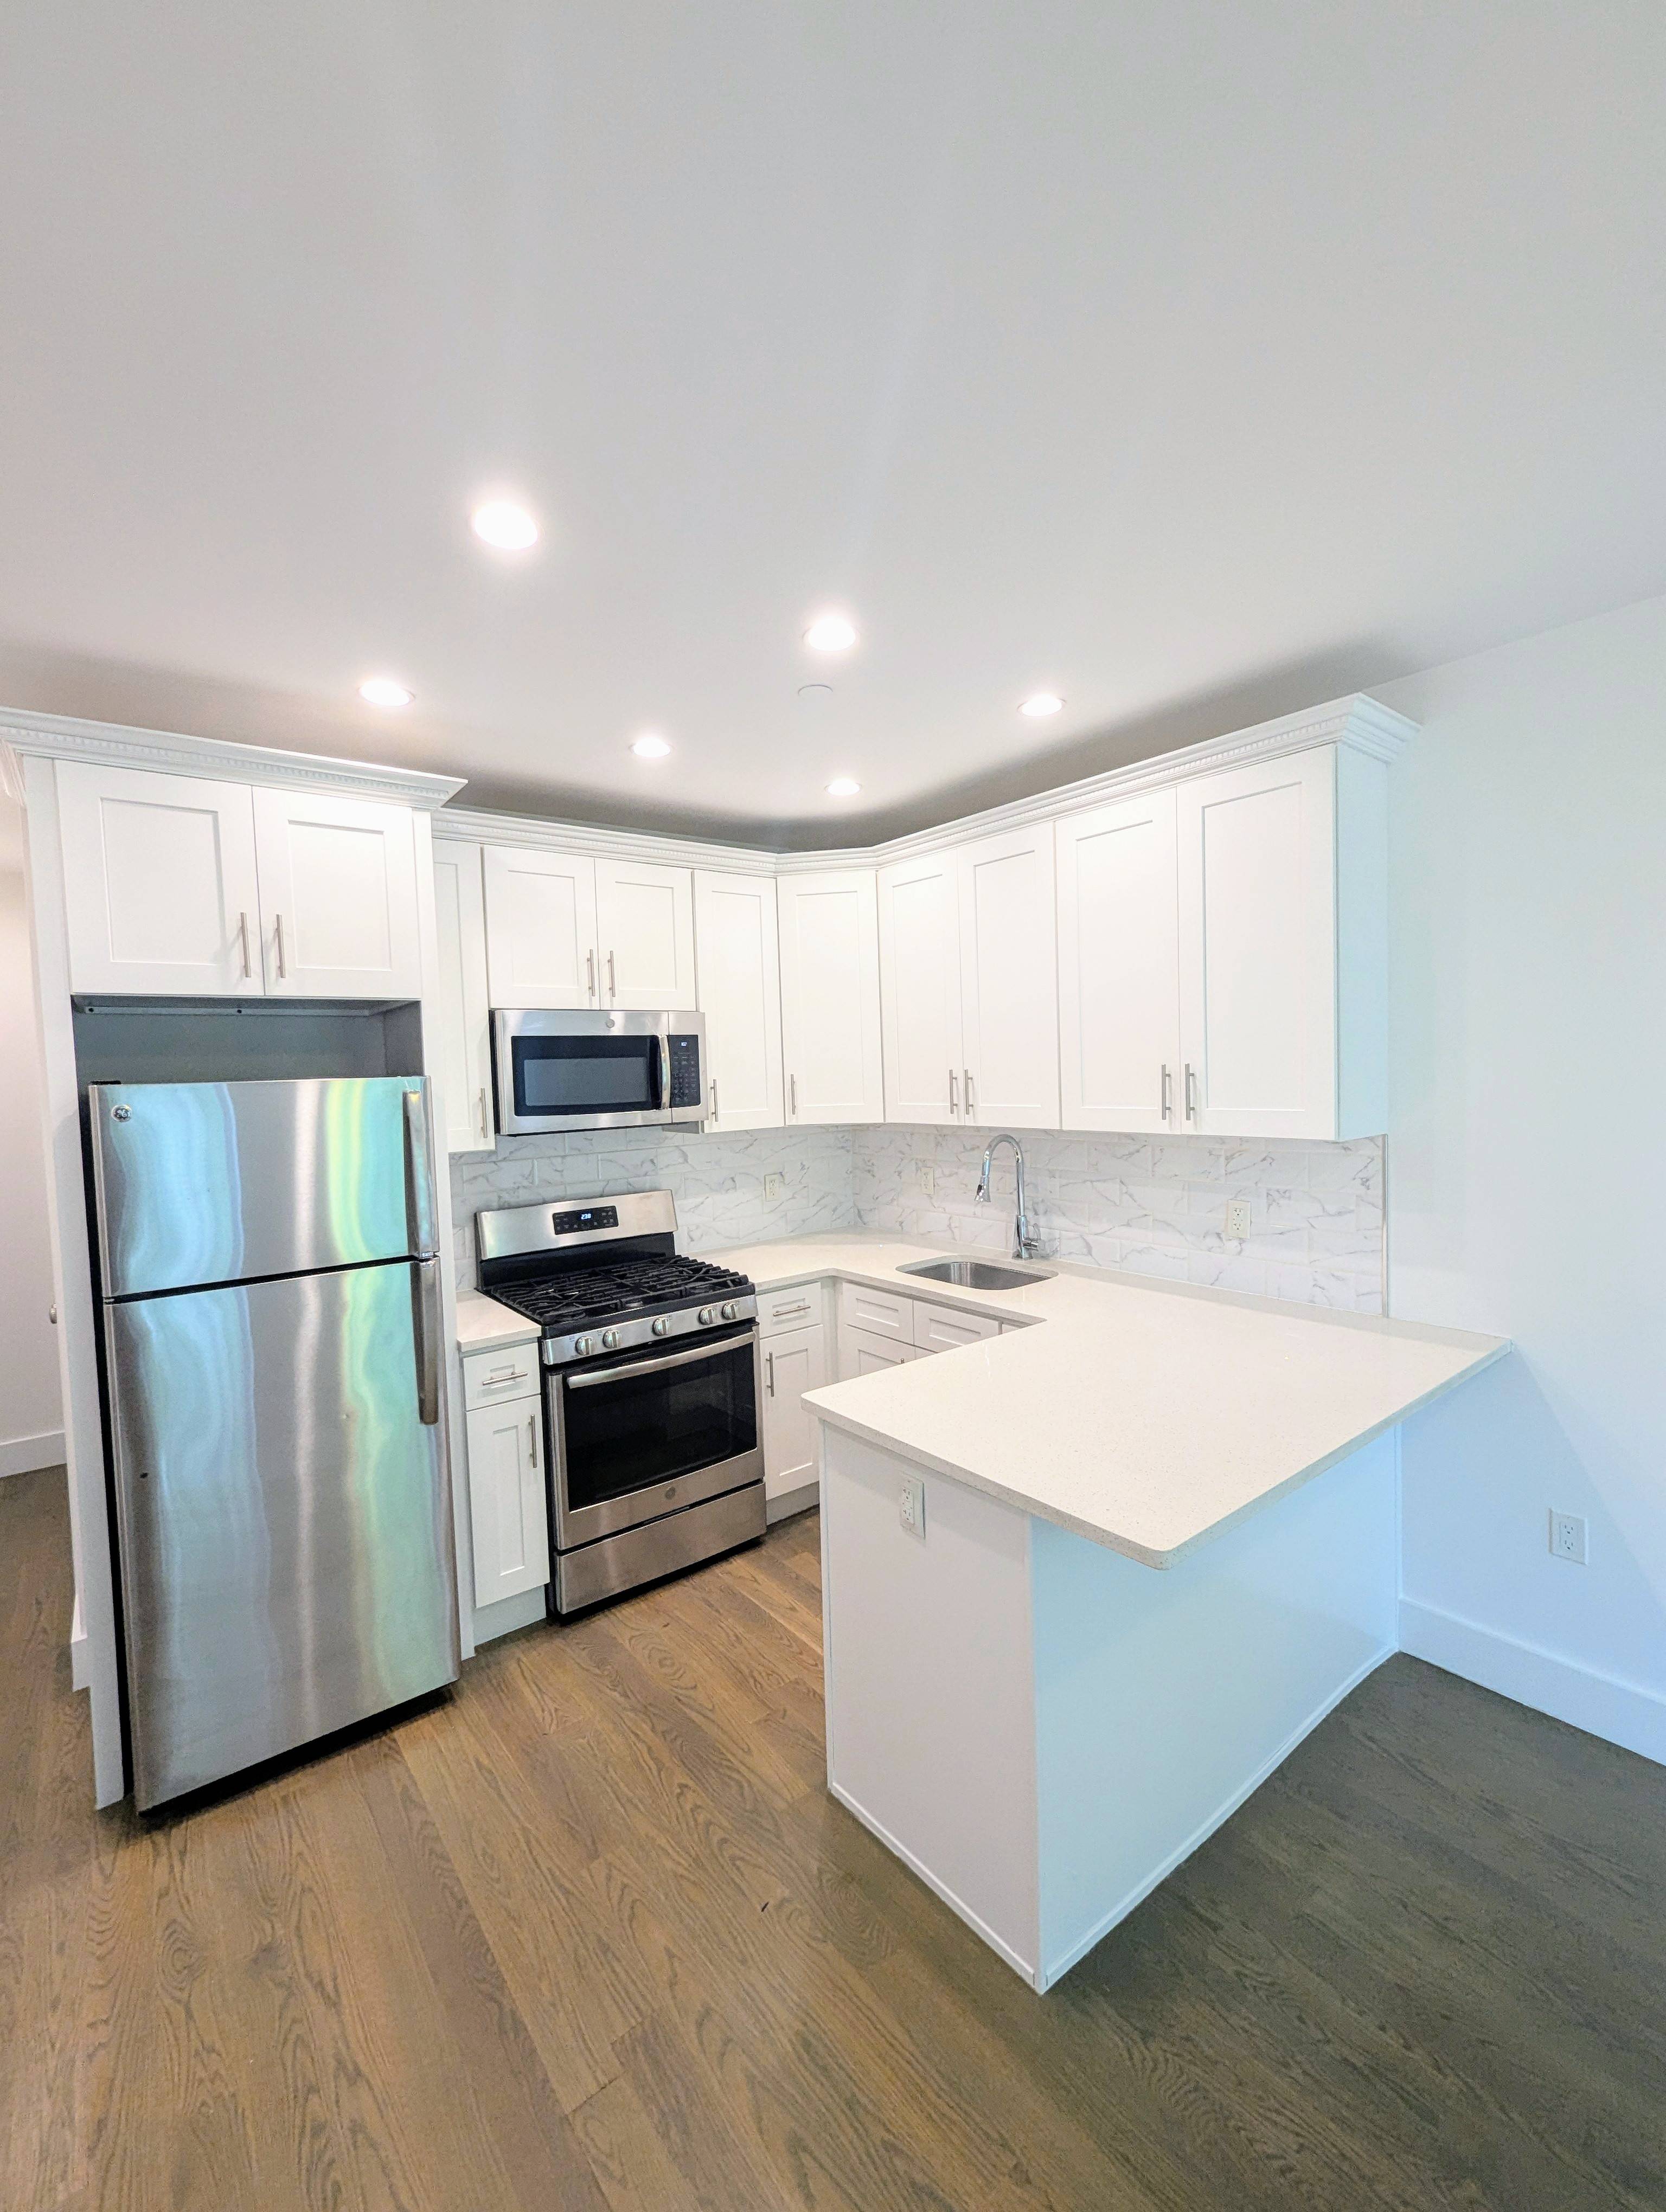 Fully loaded brand new 1 bed, 1 bath apartment with chefs kitchen